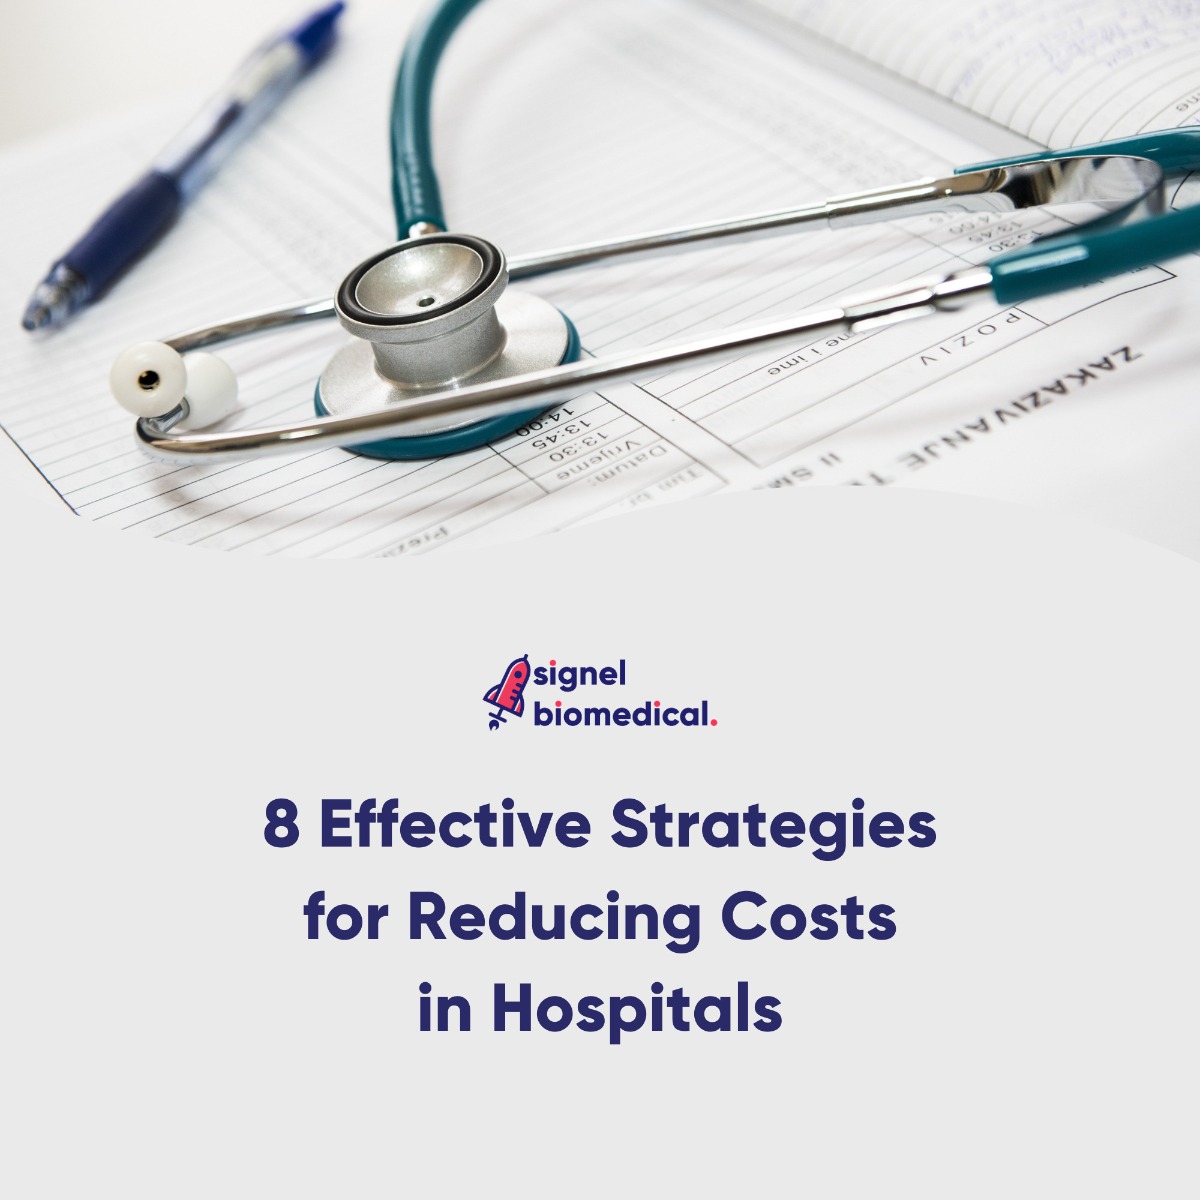 8 Effective Strategies for Reducing Costs